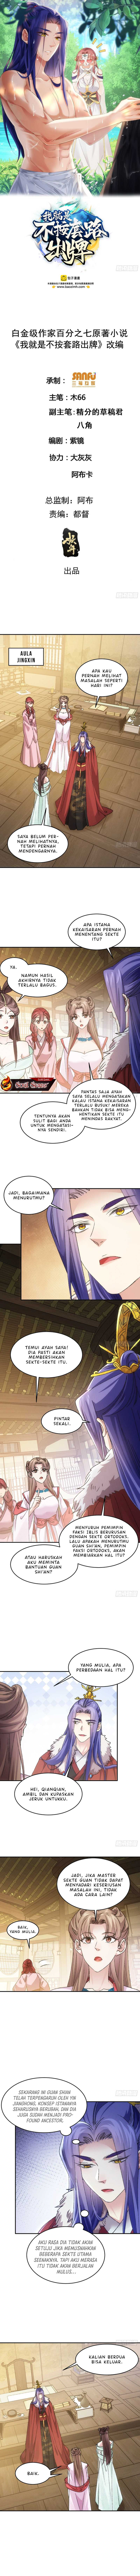 Dilarang COPAS - situs resmi www.mangacanblog.com - Komik i just dont play the card according to the routine 168 - chapter 168 169 Indonesia i just dont play the card according to the routine 168 - chapter 168 Terbaru 1|Baca Manga Komik Indonesia|Mangacan